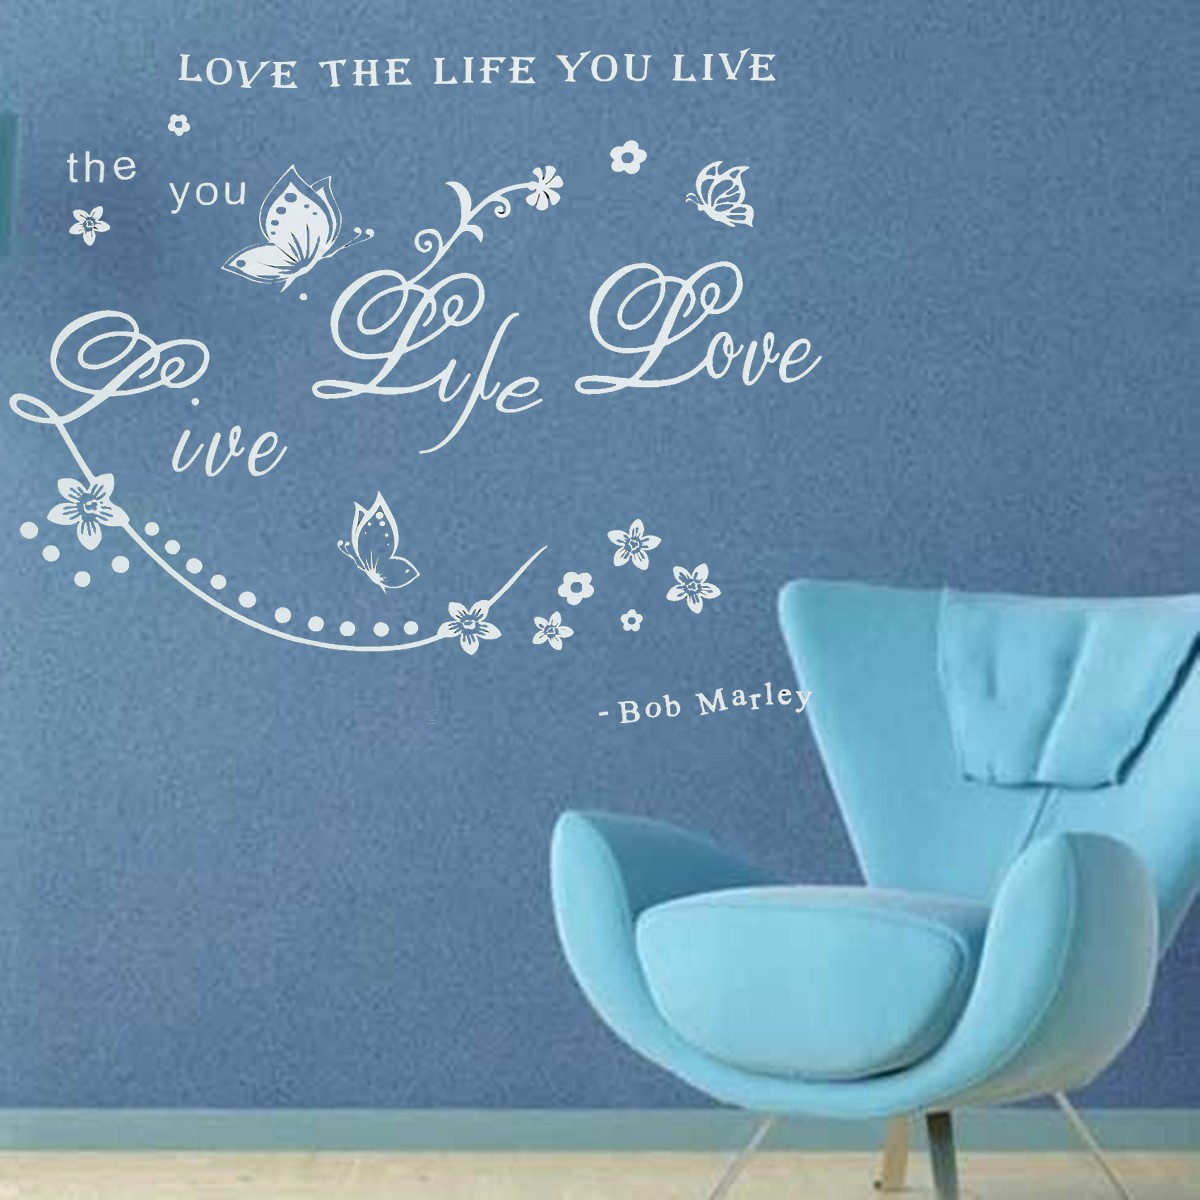 Removable-Wall-Sticker-Art-Decals-For-Home-Kitchen-Living-Room-Bedroom-Bathroom-Office-Decor-Water-R-1722049-3